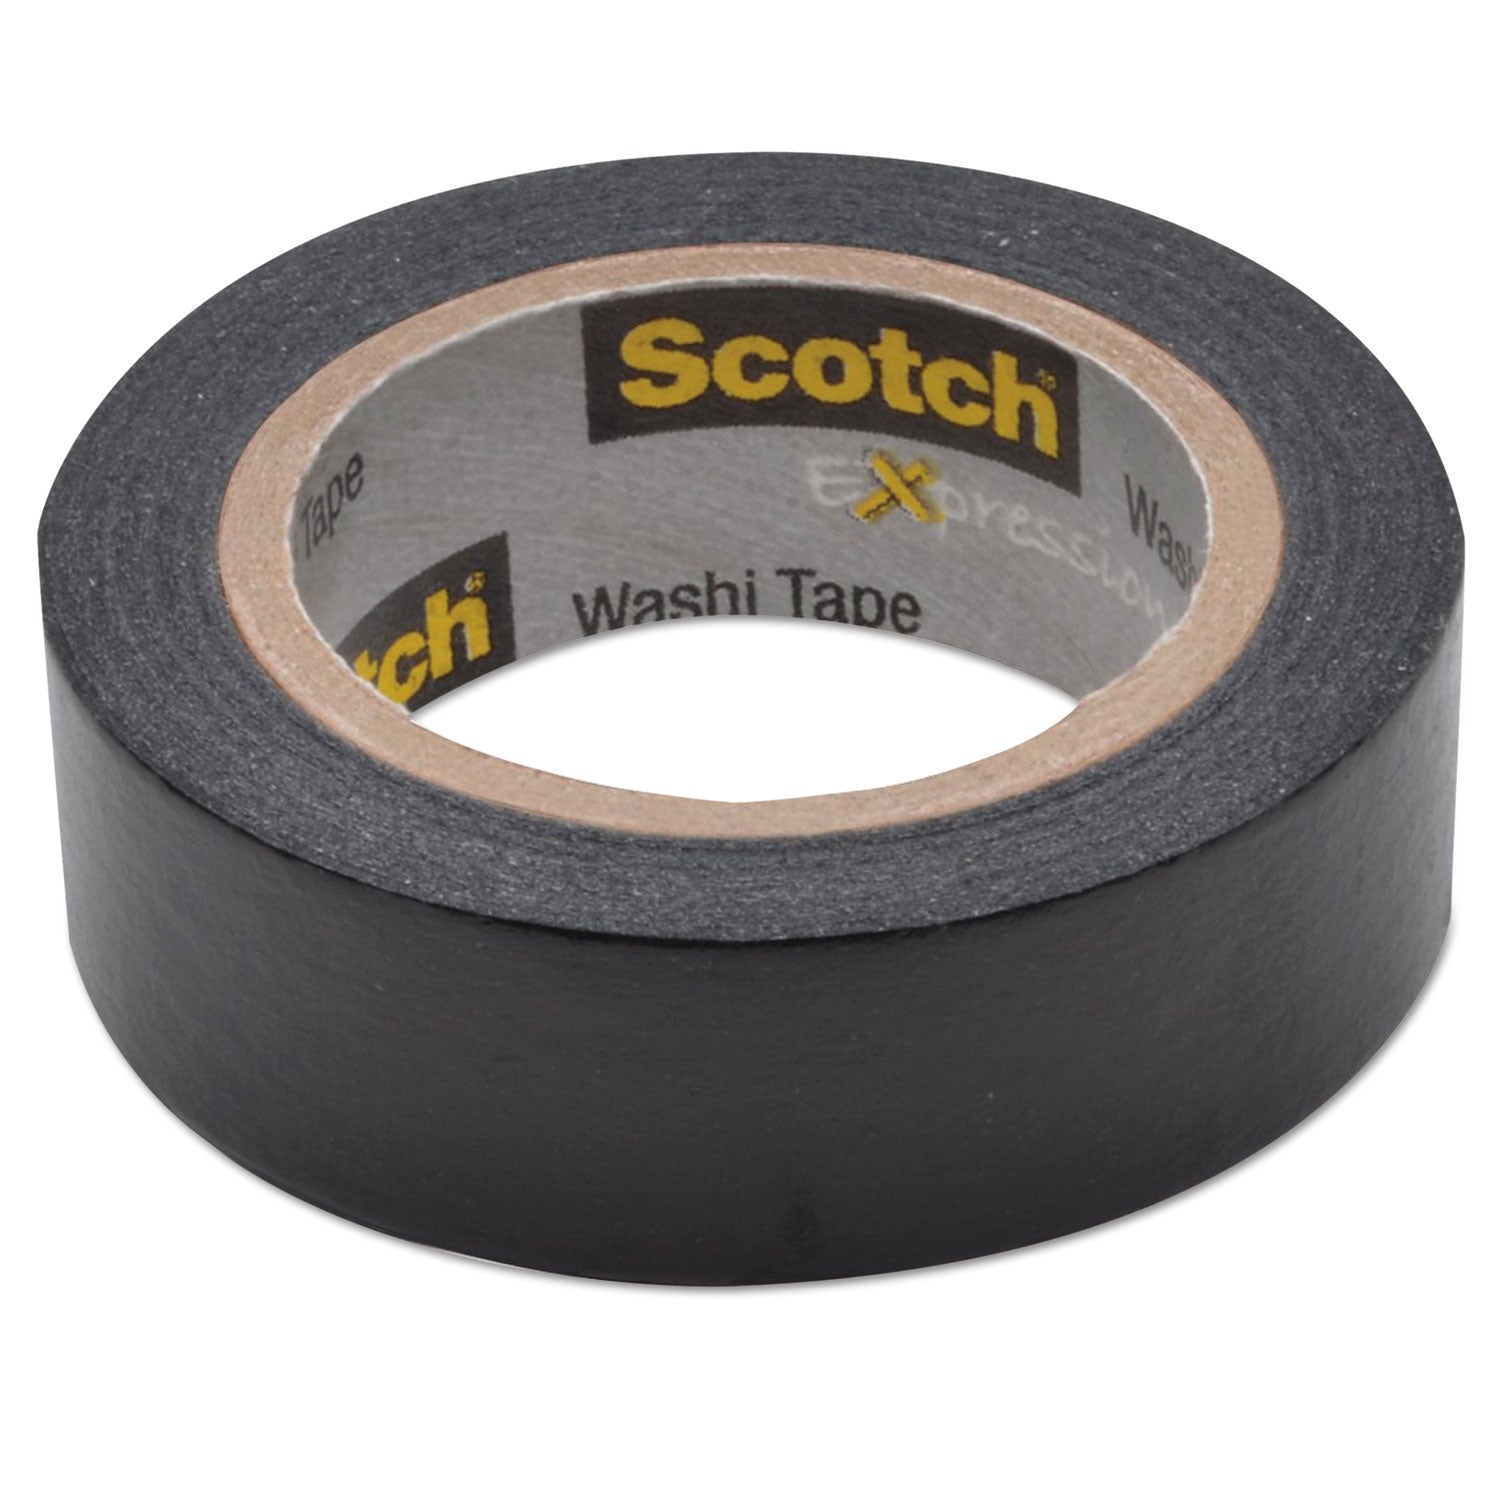 Expressions Washi Tape, 1.25" Core, 0.59" x 32.75 ft, Black - 